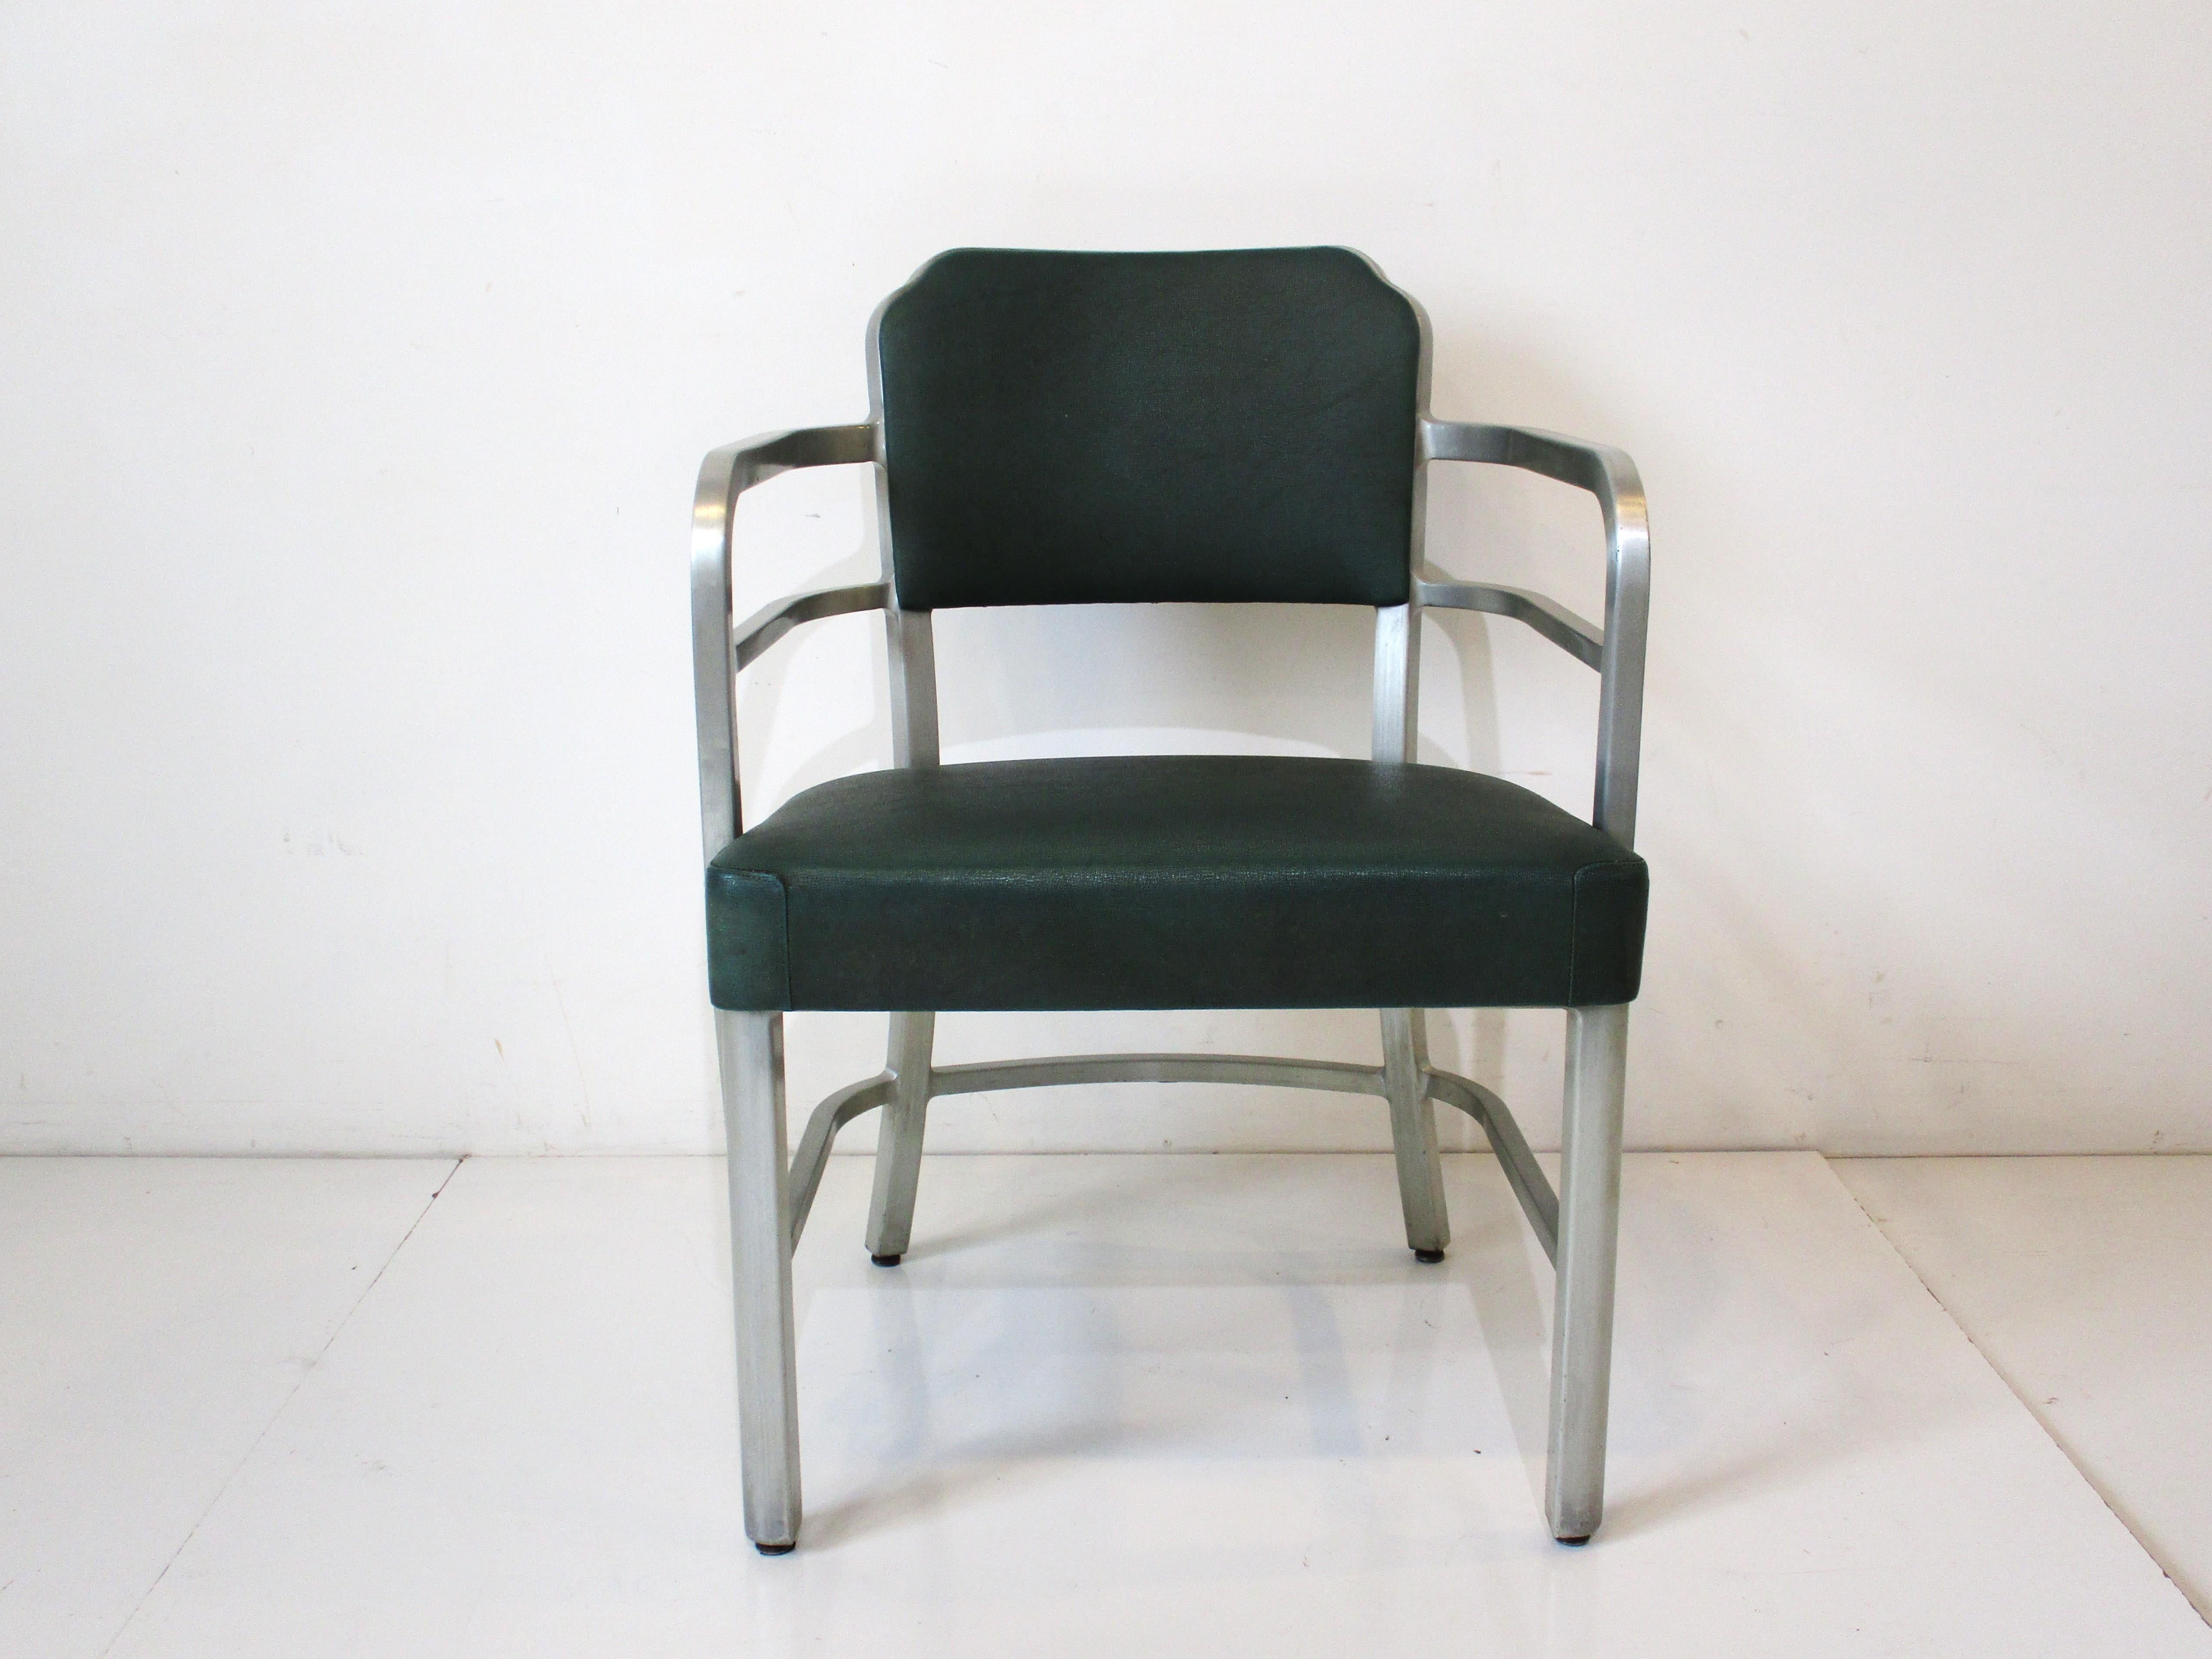 A brushed aluminum framed armchair with curved arm rests and upholstered seat and back. The fabric is a textured dark greenish leatherette and came from the barber shop at Cincinnati's inconic Union Terminal Art Deco train station. Manufactured by